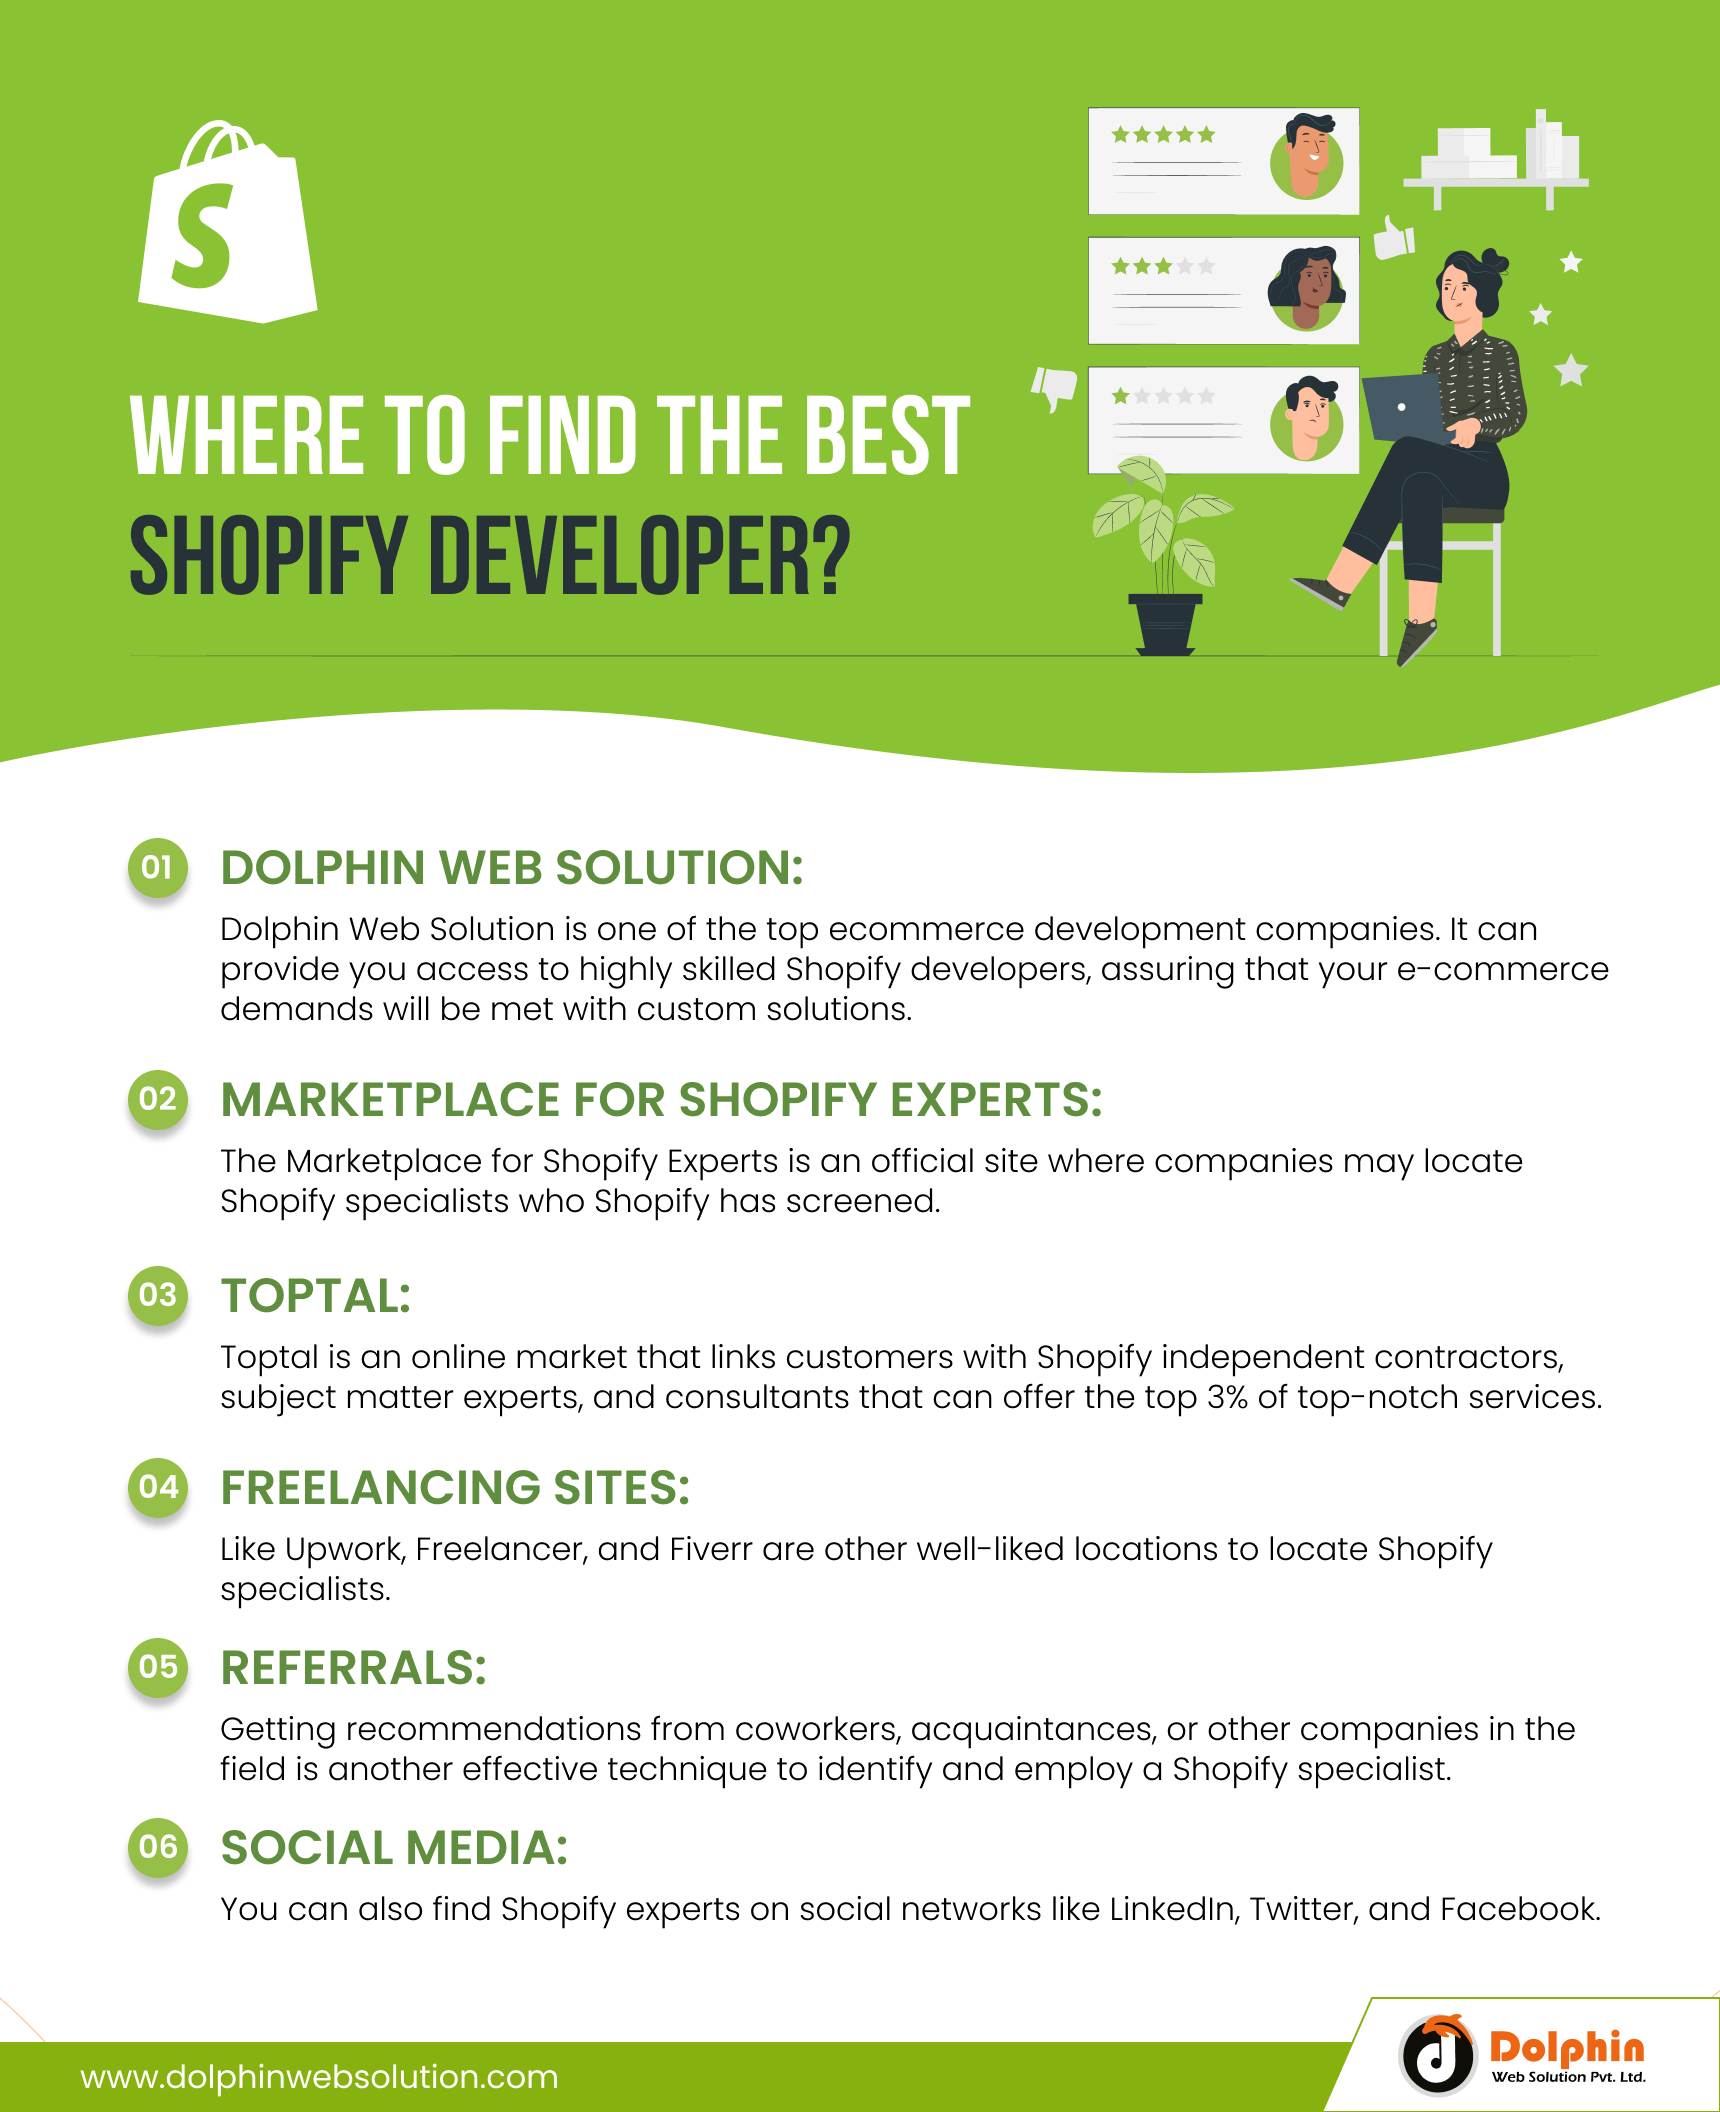 Where to Find the Best Shopify Developer